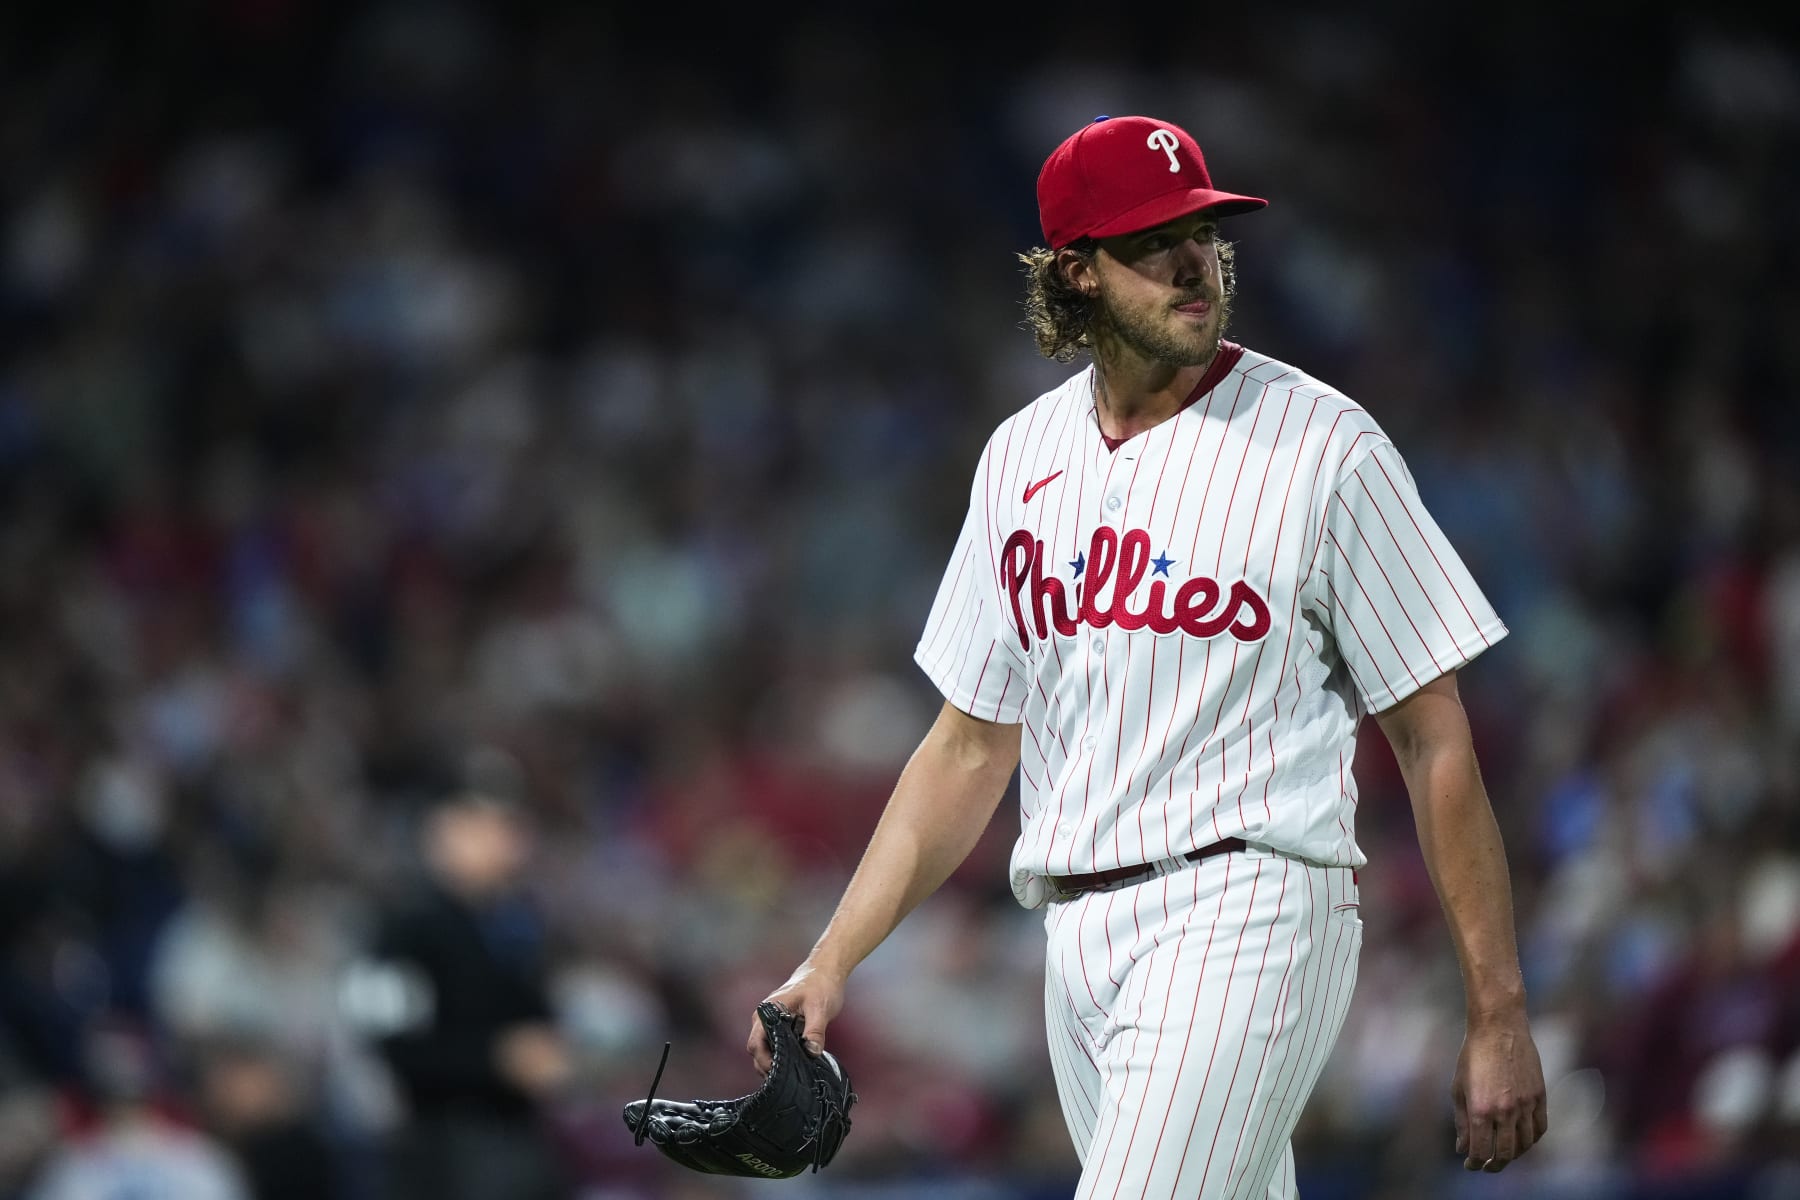 While much of the Phillies' pitching staff flounders, Aaron Nola